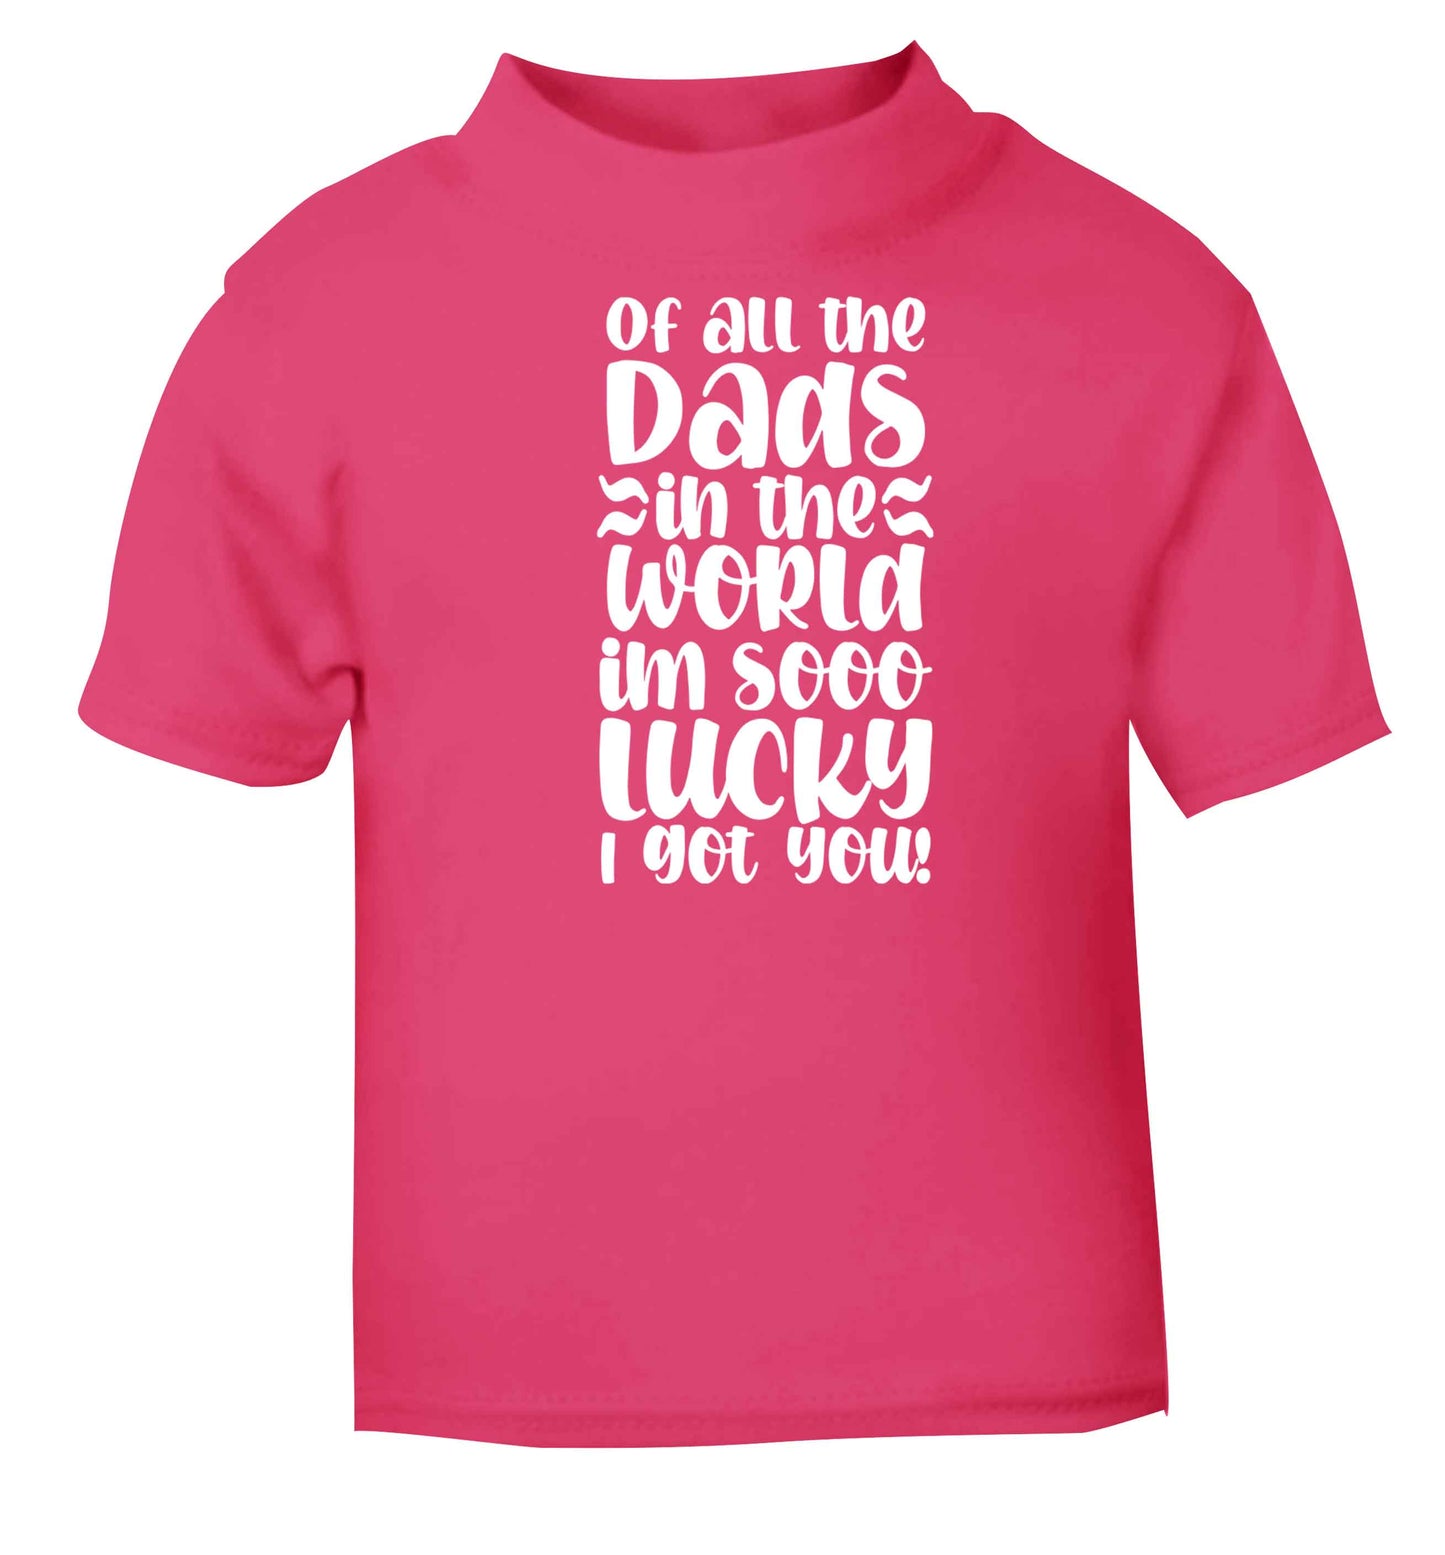 Of all the Dads in the world I'm so lucky I got you pink baby toddler Tshirt 2 Years